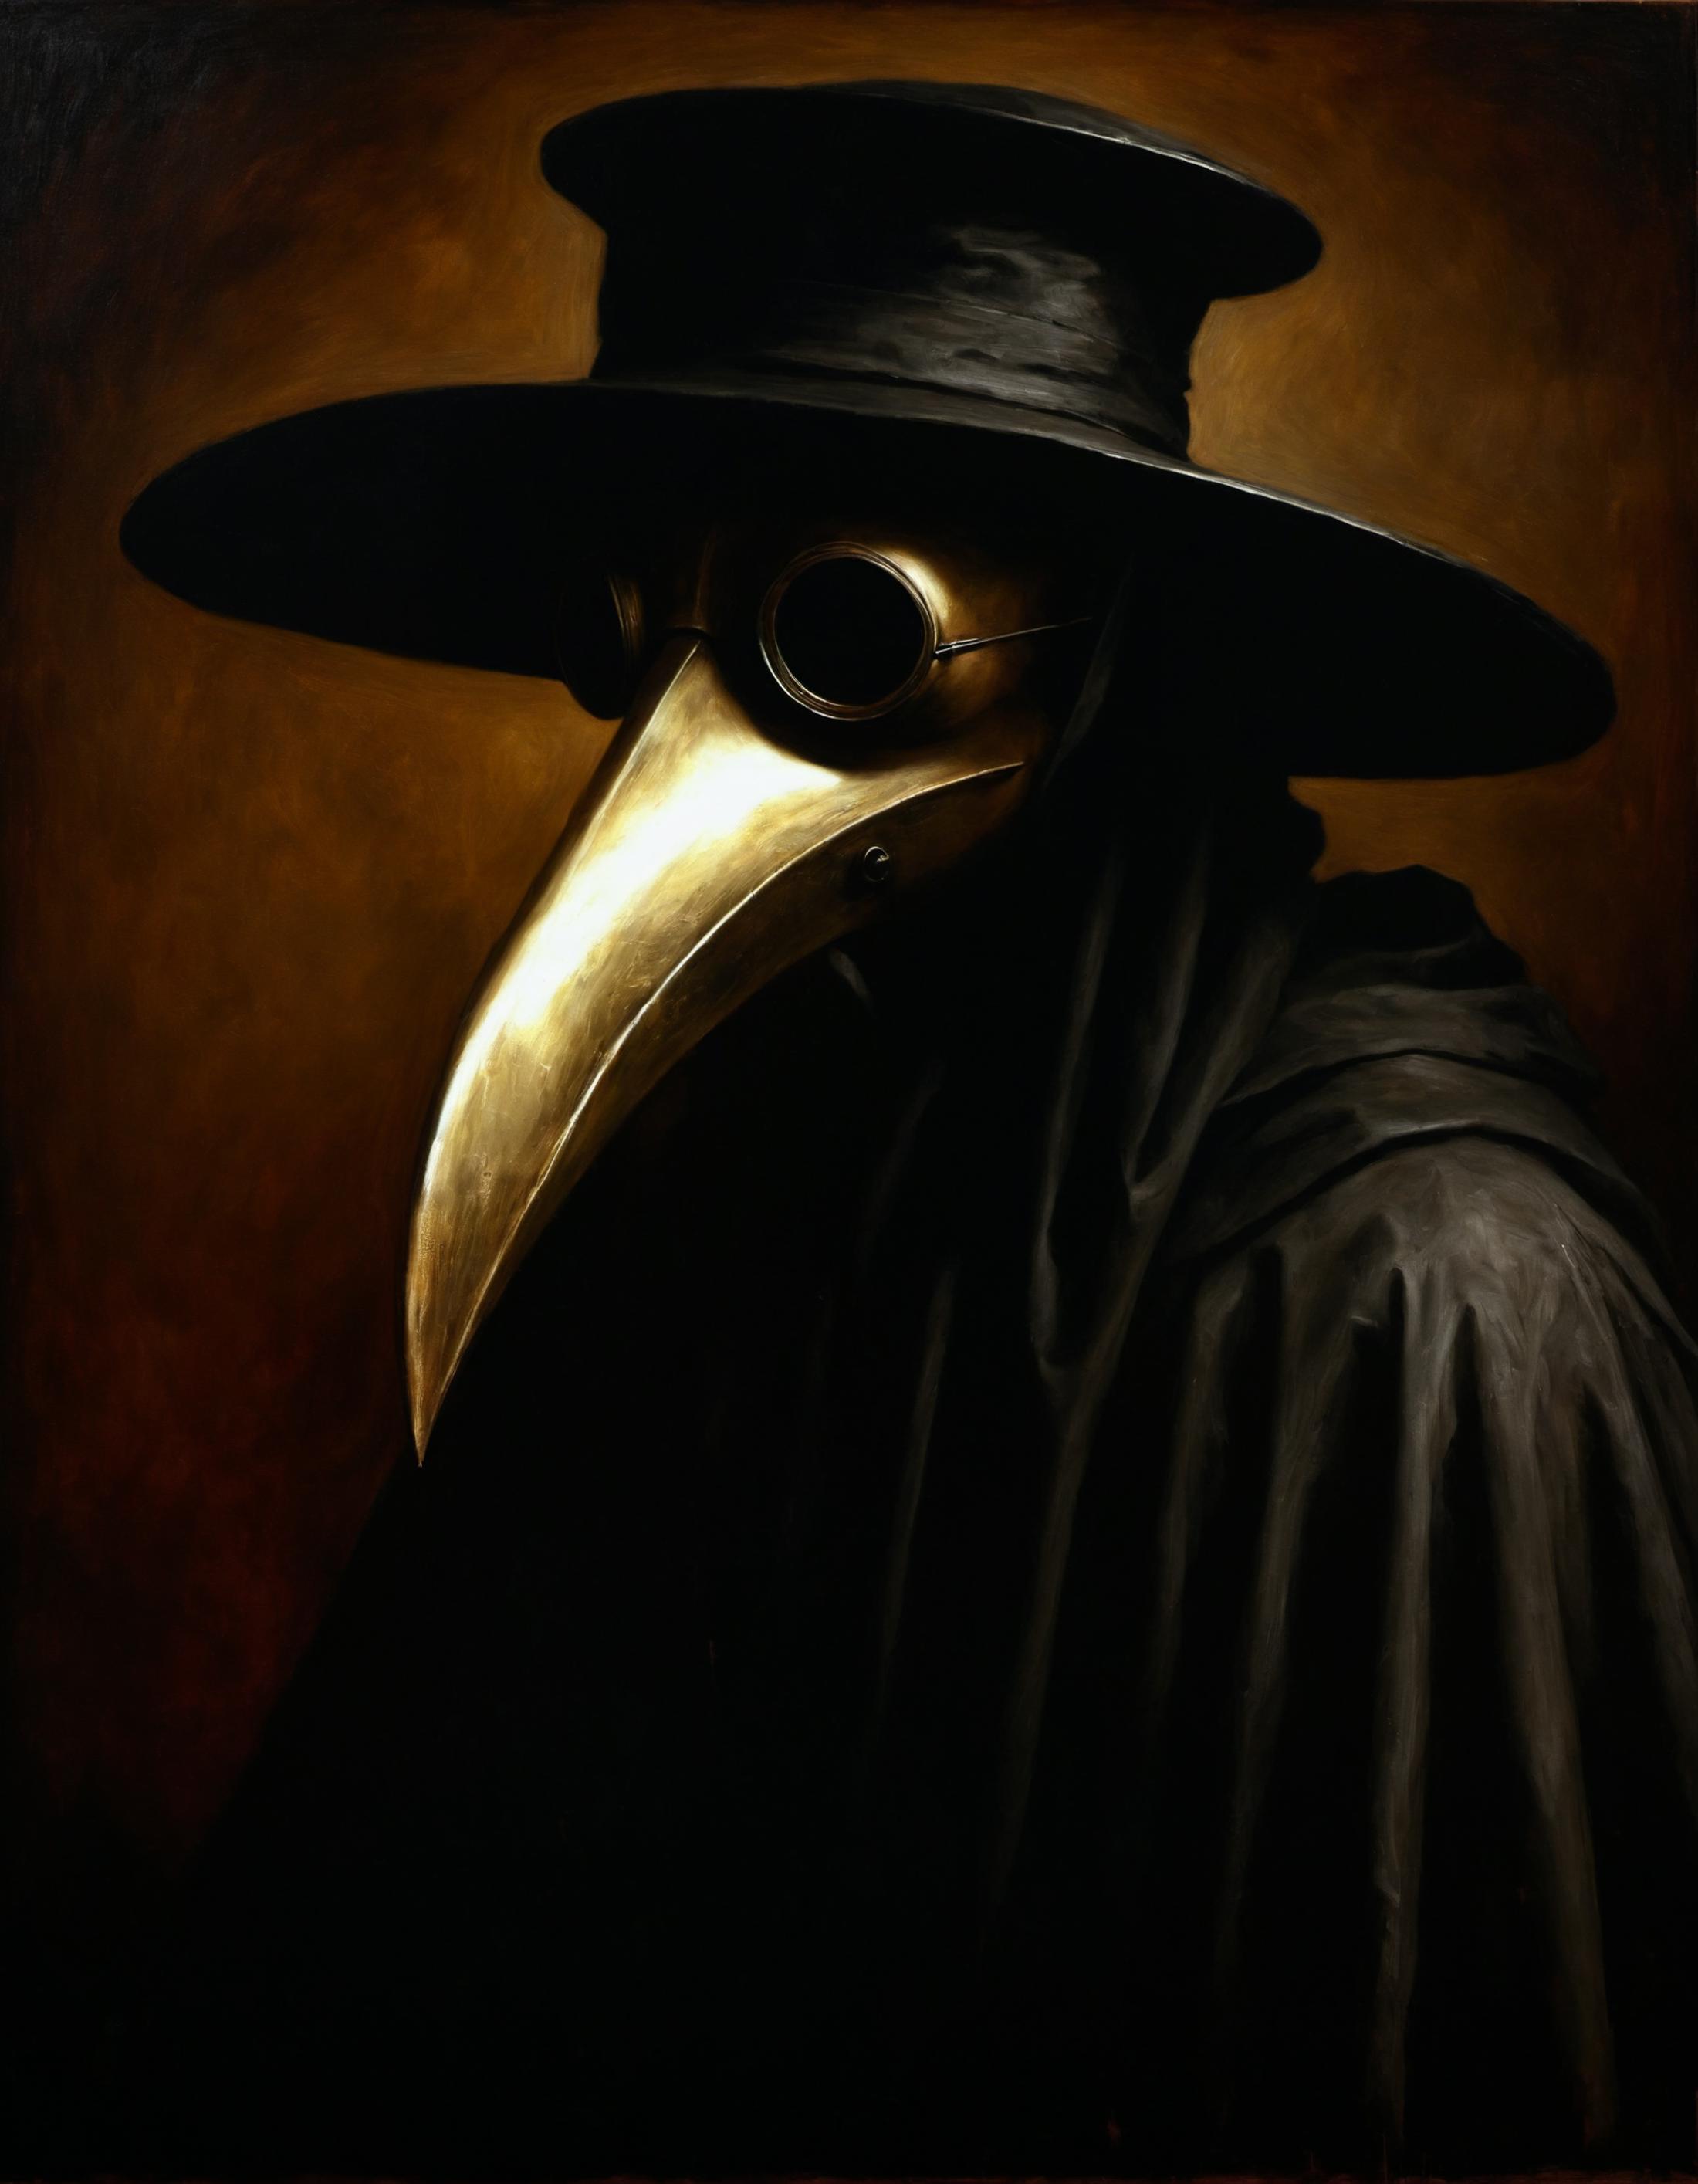 A black and gold painting of a person wearing a black hat and a black mask.